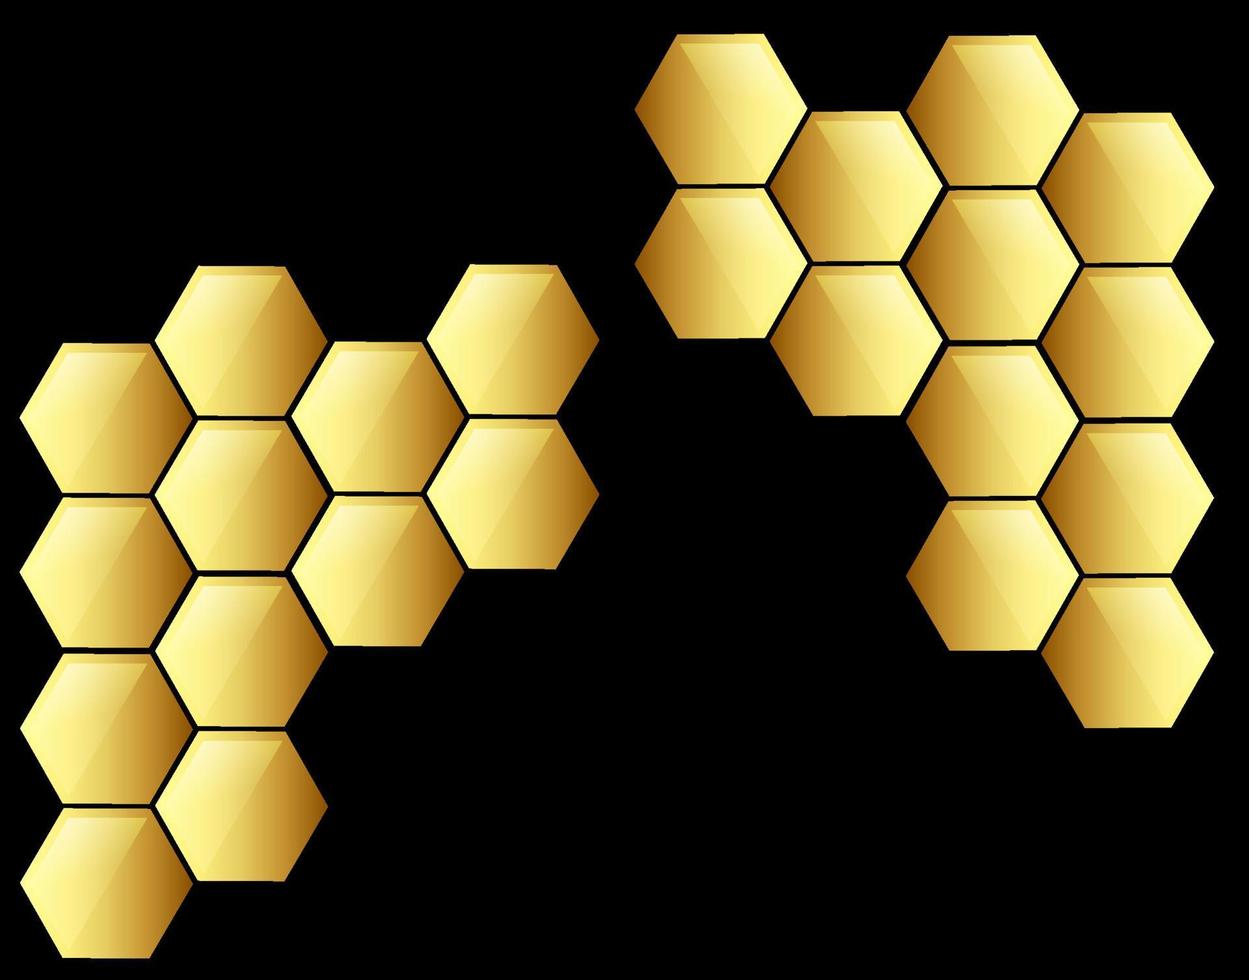 golden hexagon background isolated on black background. vector